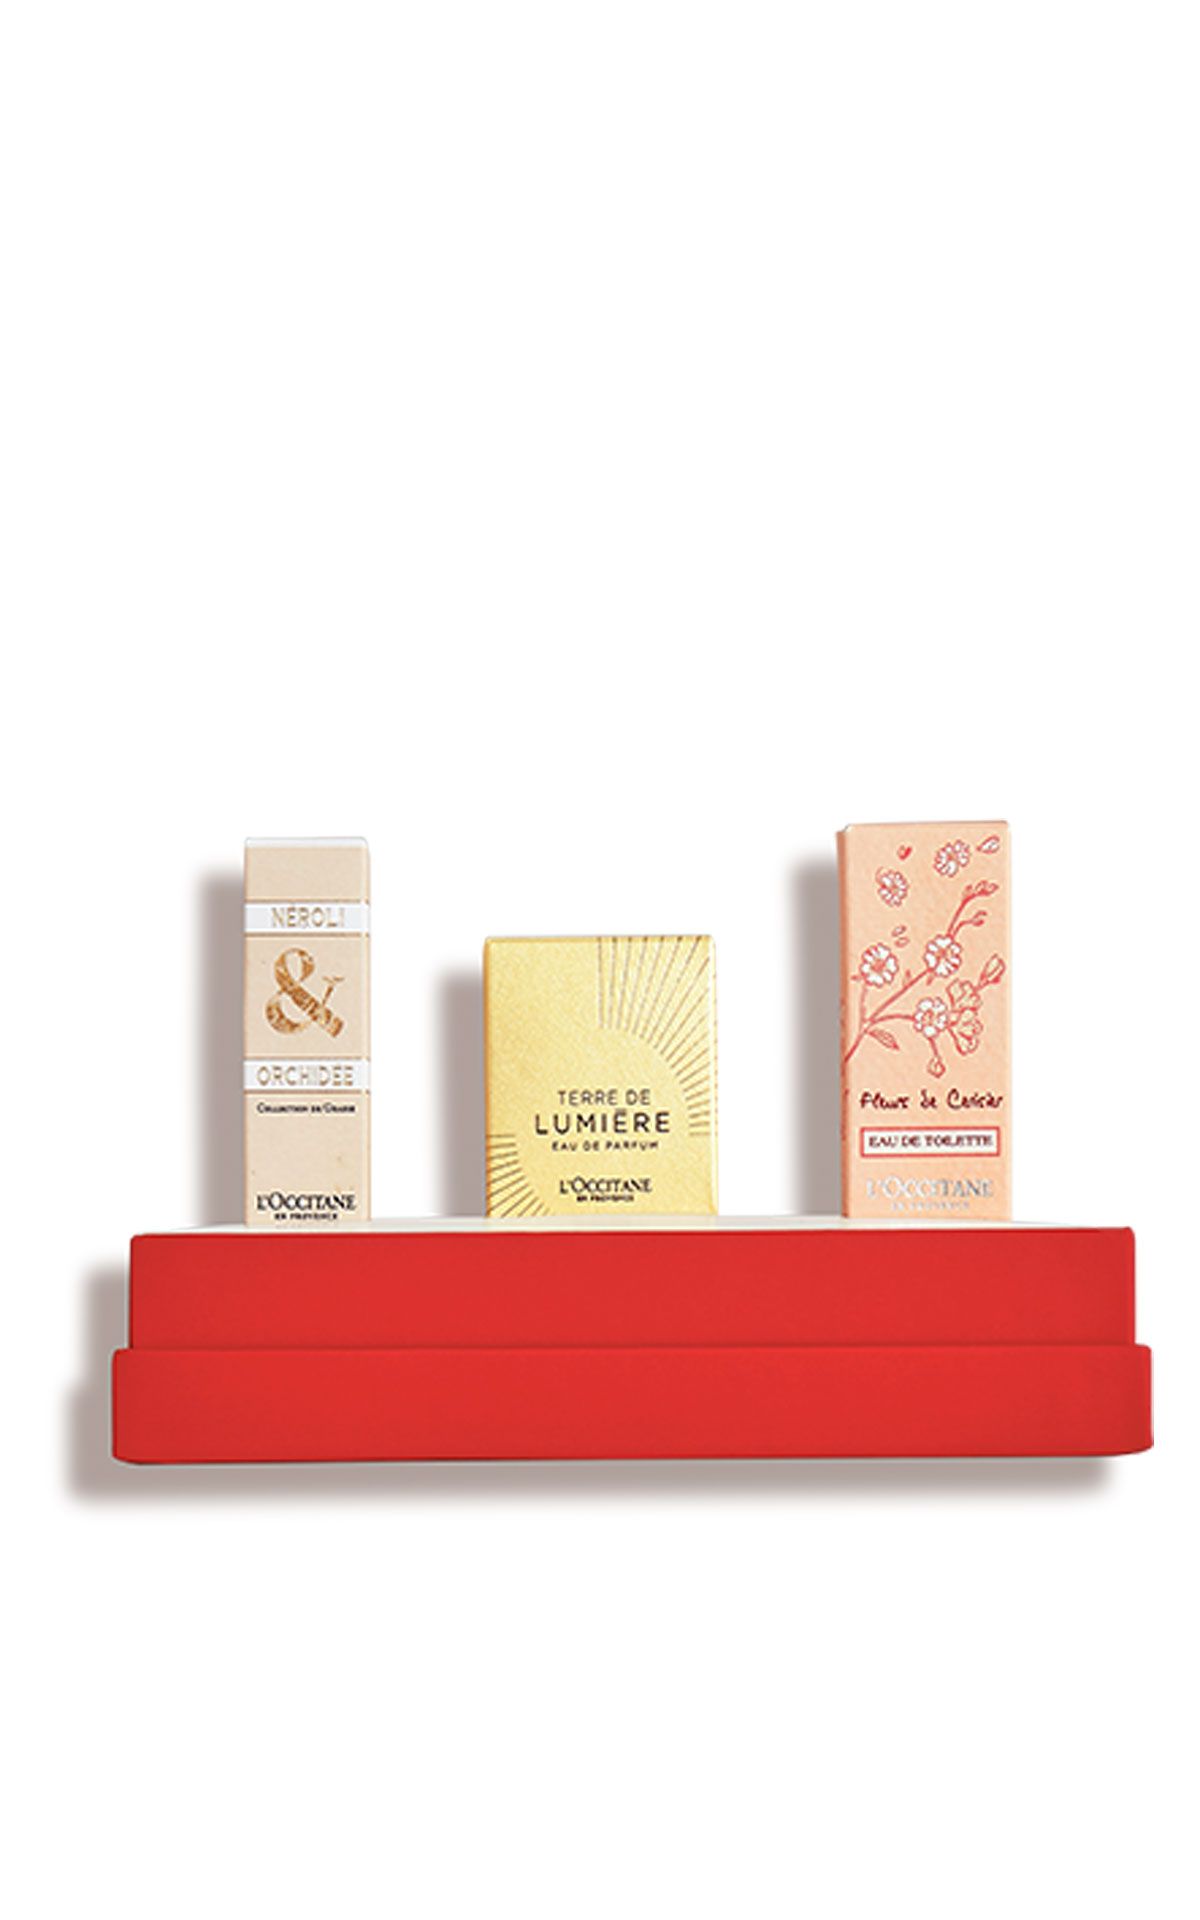 L'Occitane Mini EDT collection from Bicester Village